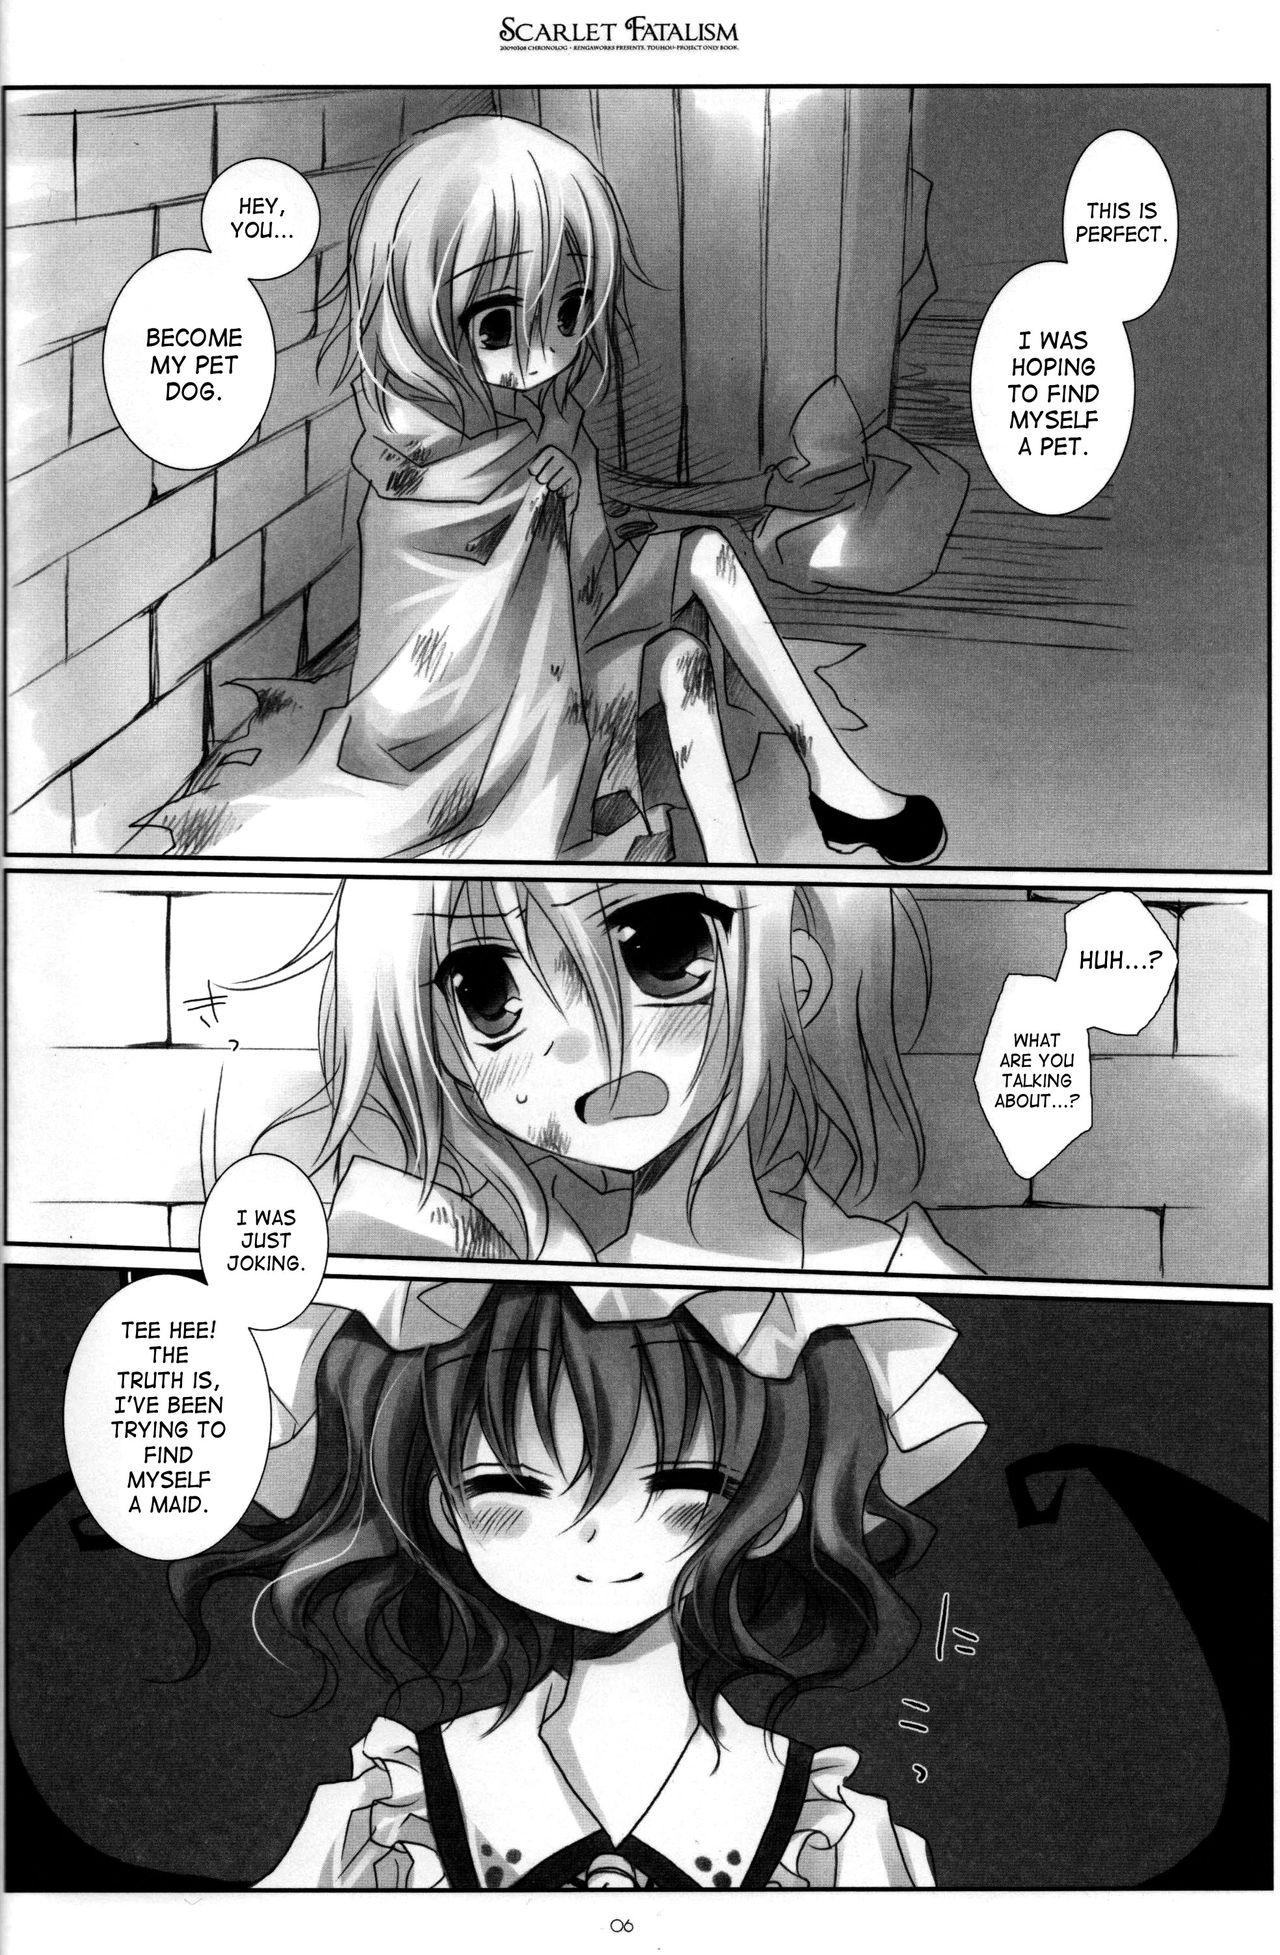 Petite Teenager Scarlet Fatalism - Touhou project Gemendo - Page 7